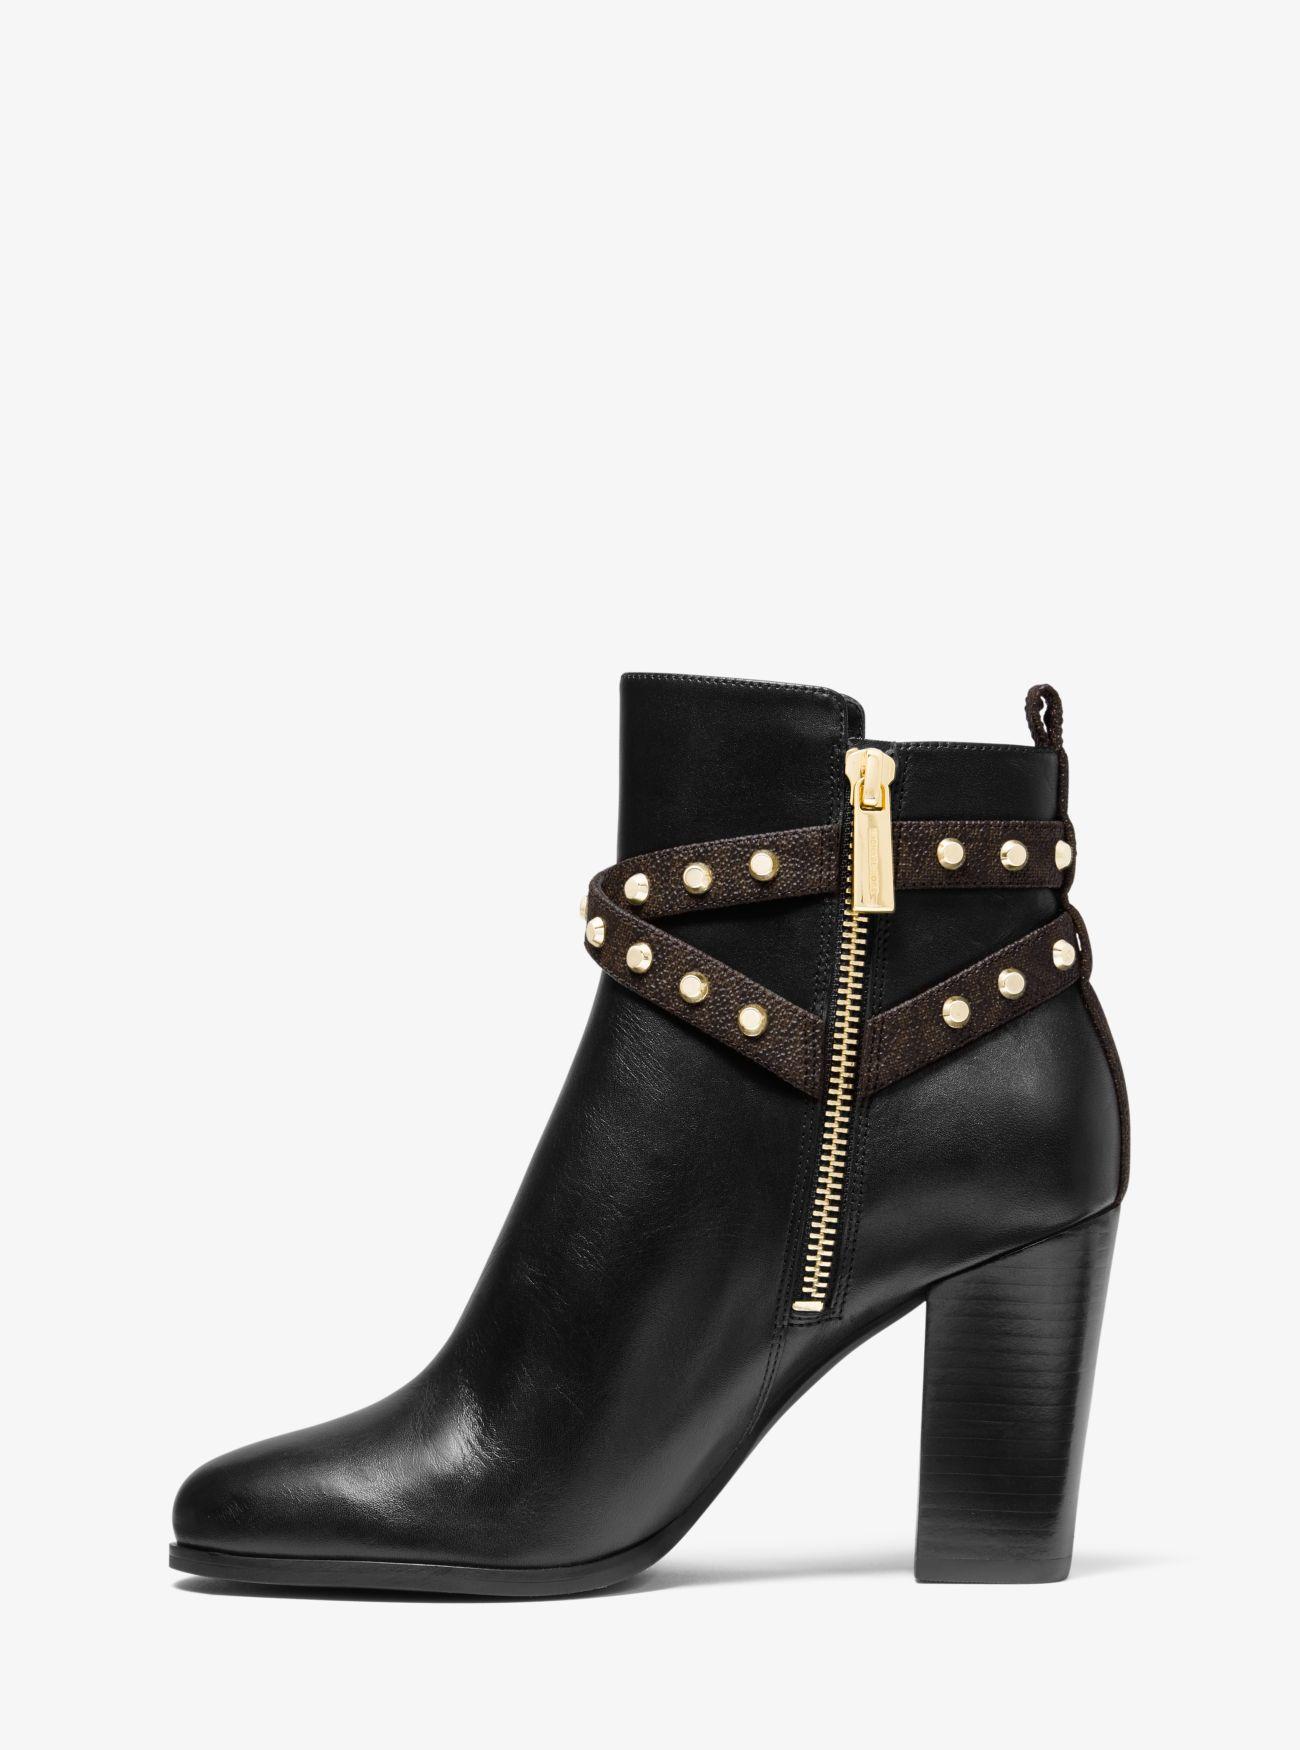 MICHAEL Michael Kors Preston Studded Leather Ankle Boot in Brown - Lyst